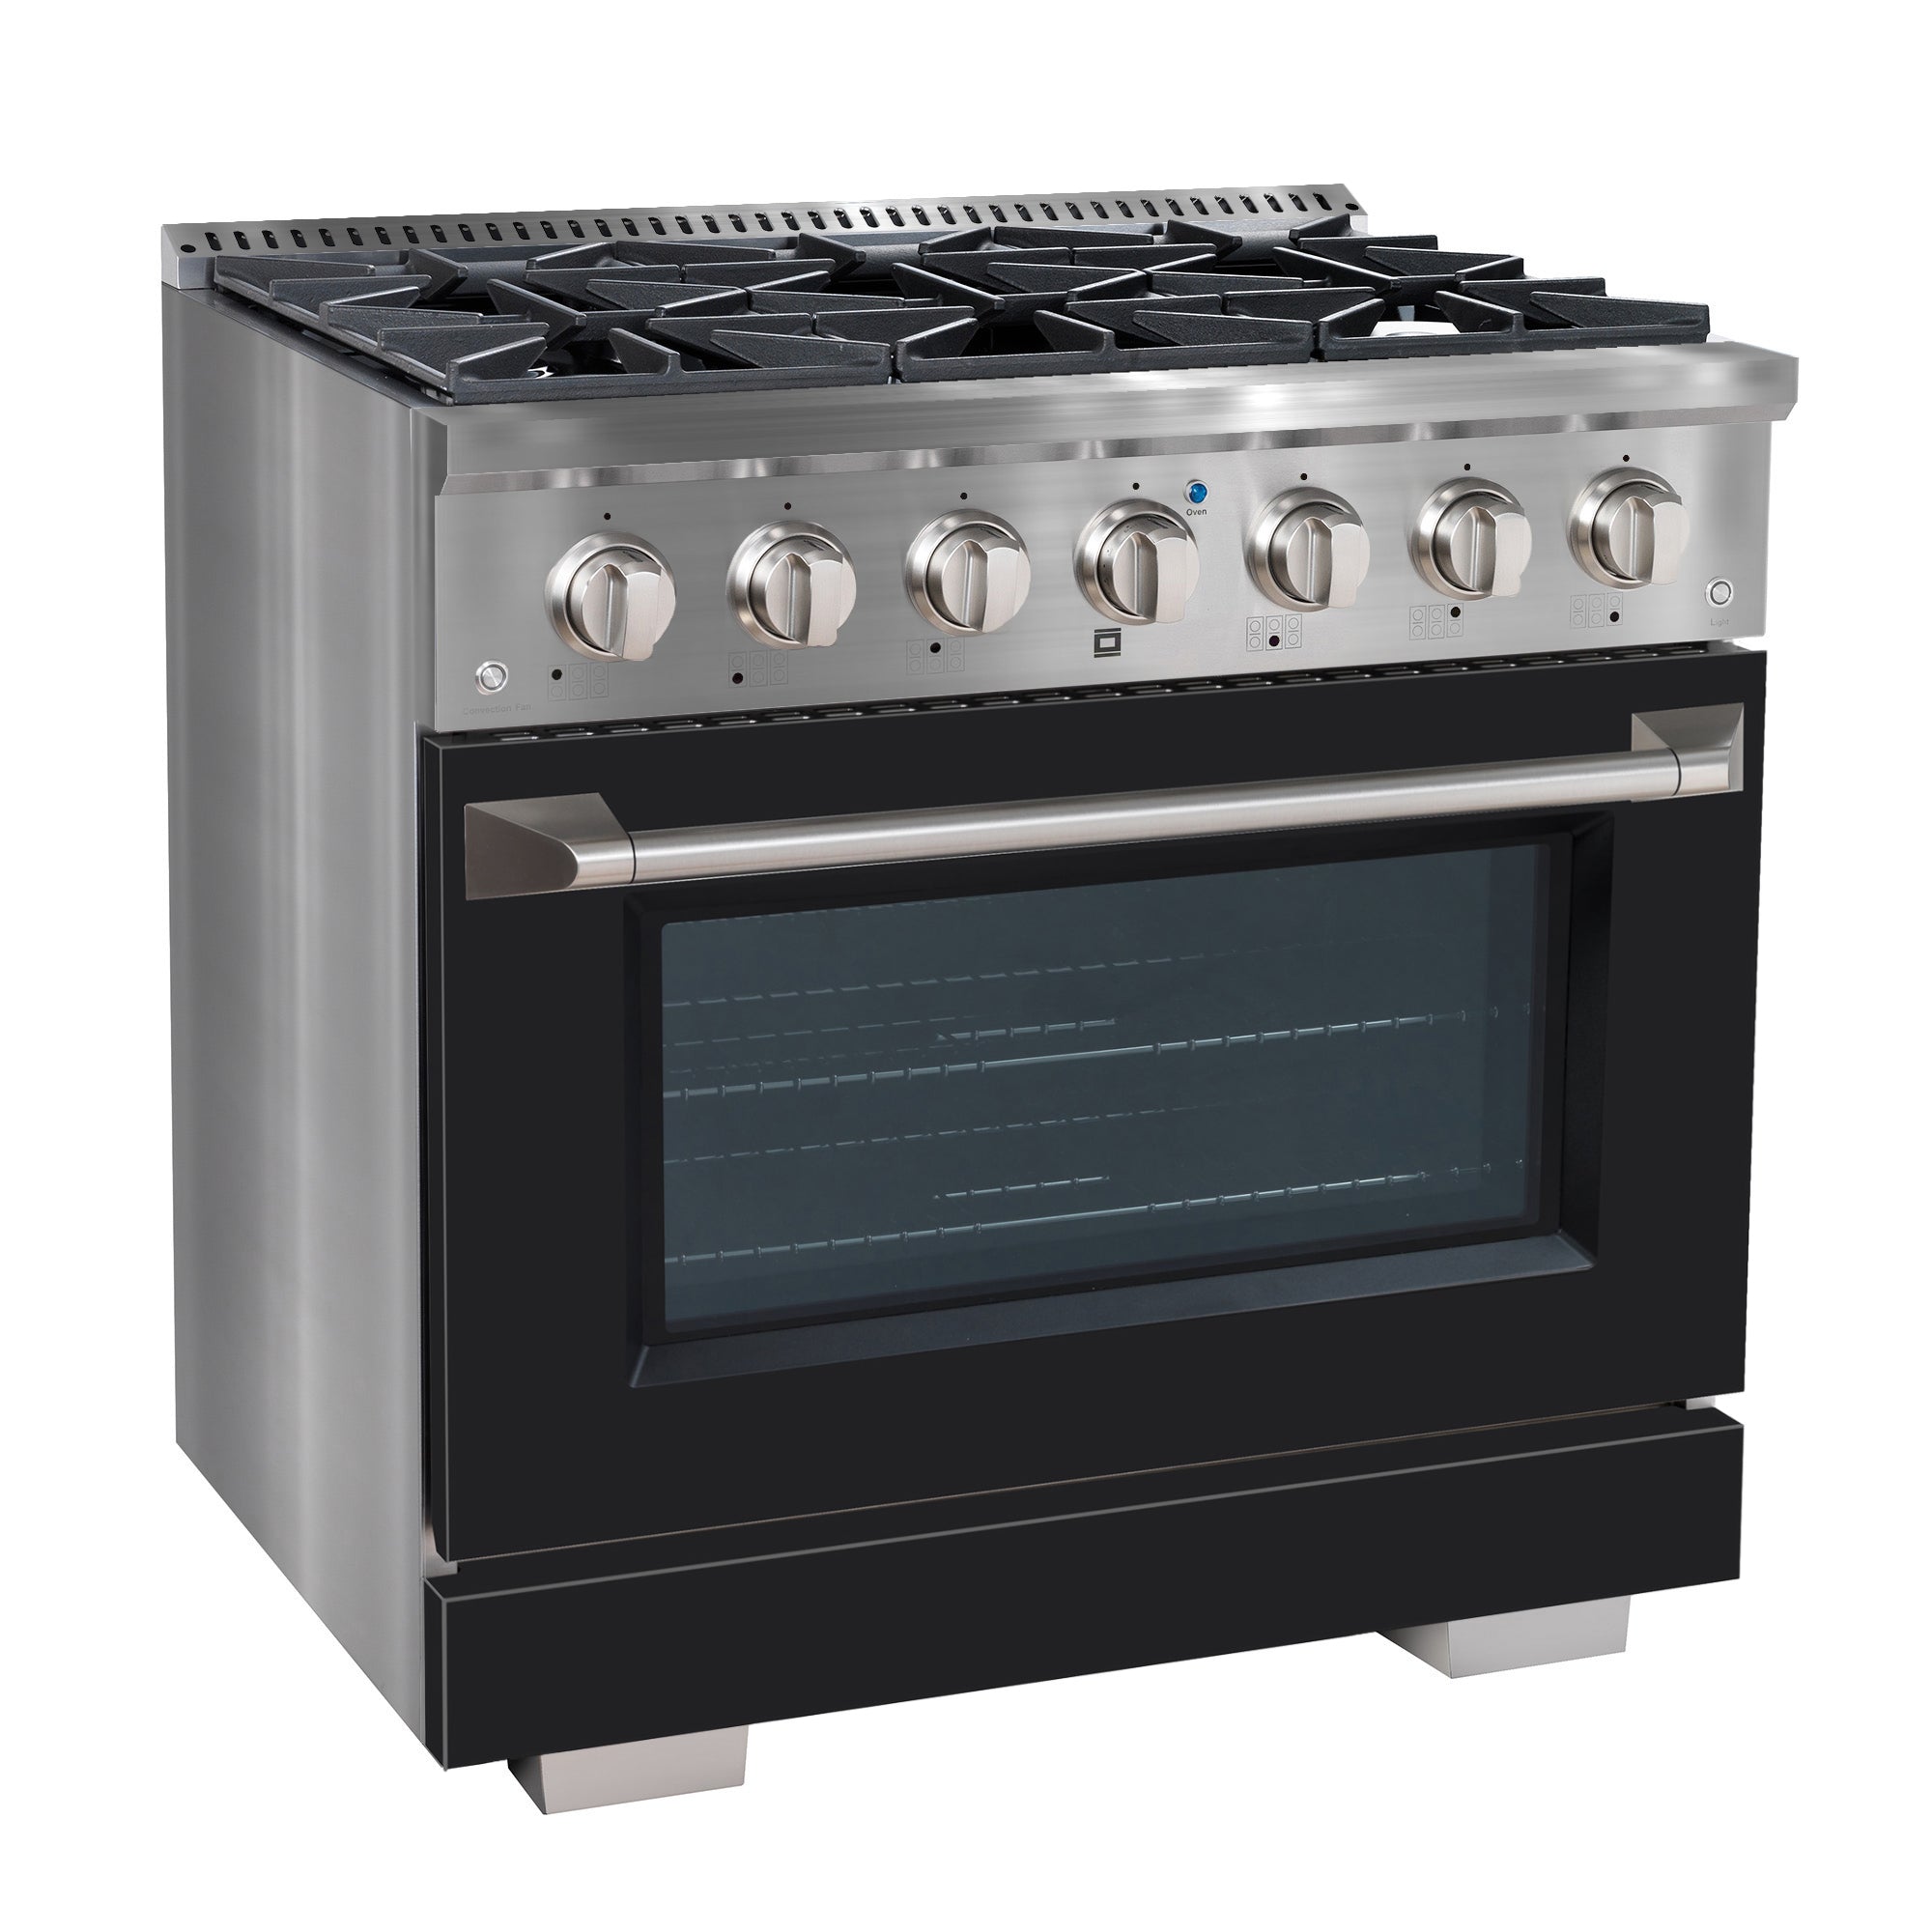 Ancona 36” 5.2 cu. ft. Gas Range with 6 Burners and Convection Oven in Stainless Steel with Black Door